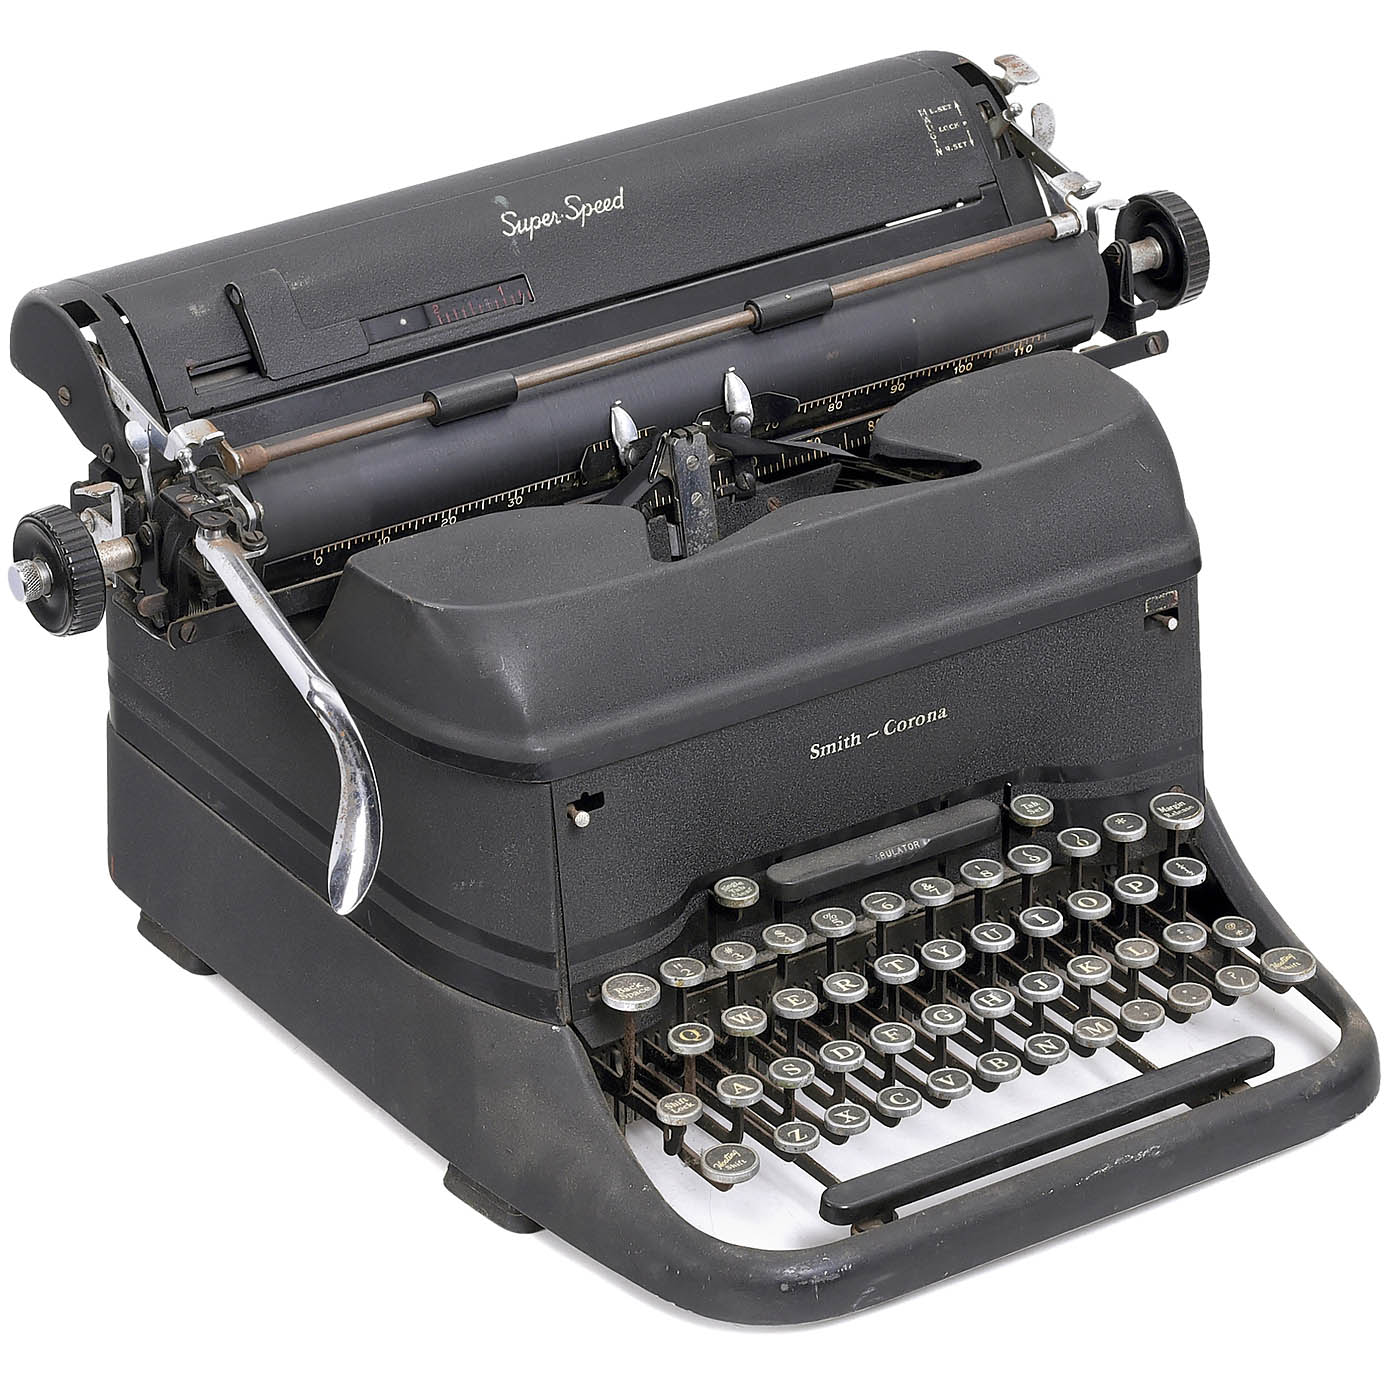 4 Typewriters for Everyday Use - Image 5 of 5